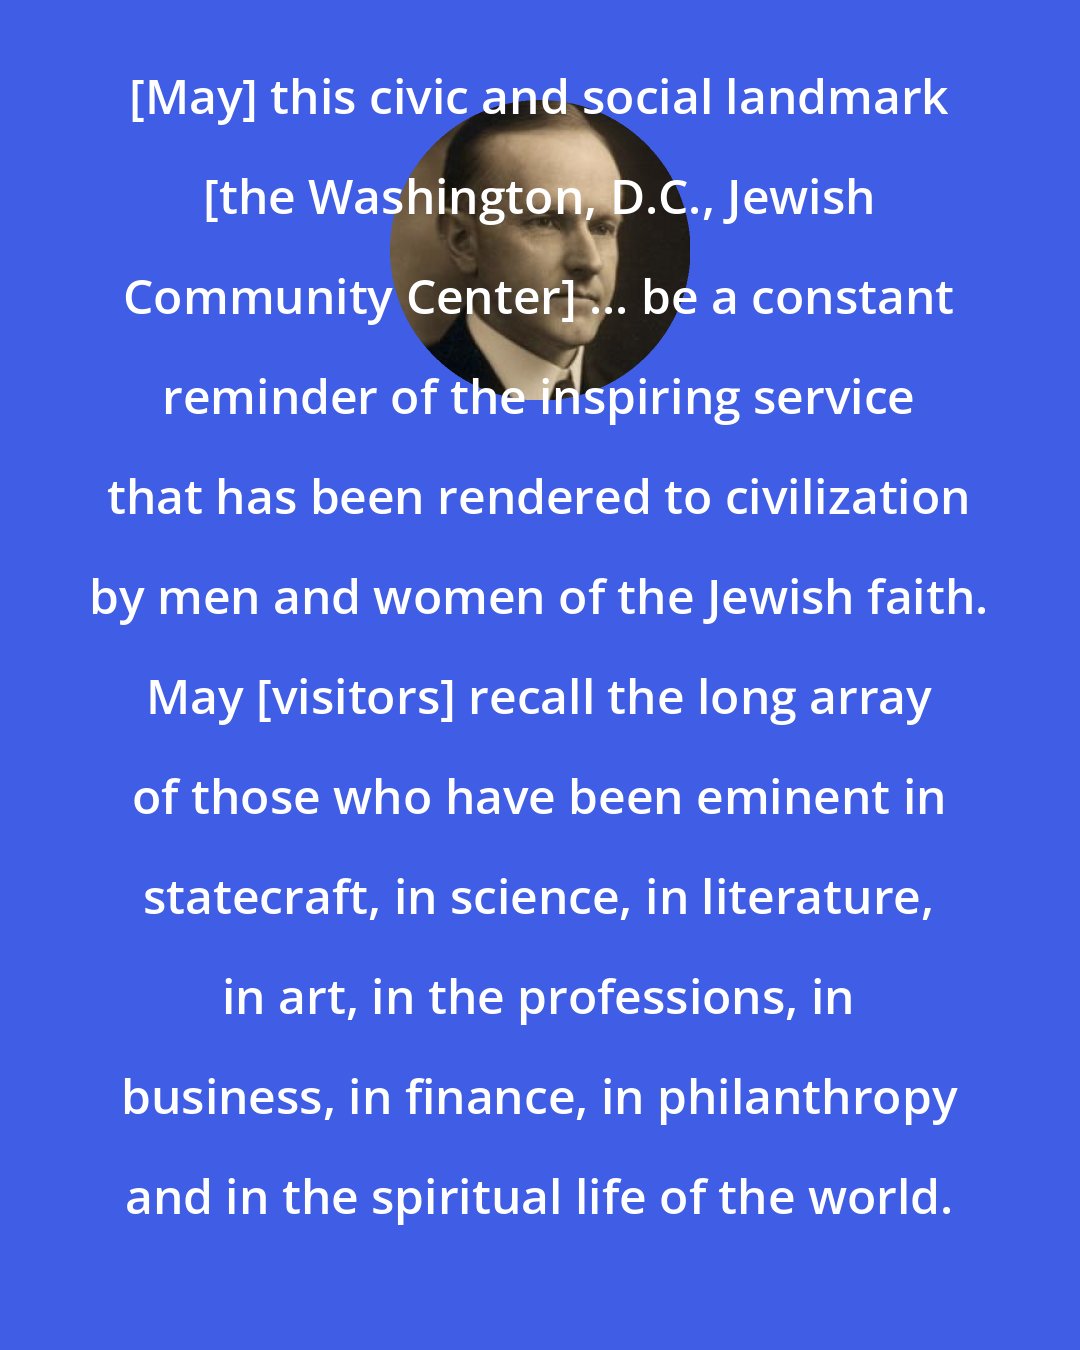 Calvin Coolidge: [May] this civic and social landmark [the Washington, D.C., Jewish Community Center] ... be a constant reminder of the inspiring service that has been rendered to civilization by men and women of the Jewish faith. May [visitors] recall the long array of those who have been eminent in statecraft, in science, in literature, in art, in the professions, in business, in finance, in philanthropy and in the spiritual life of the world.